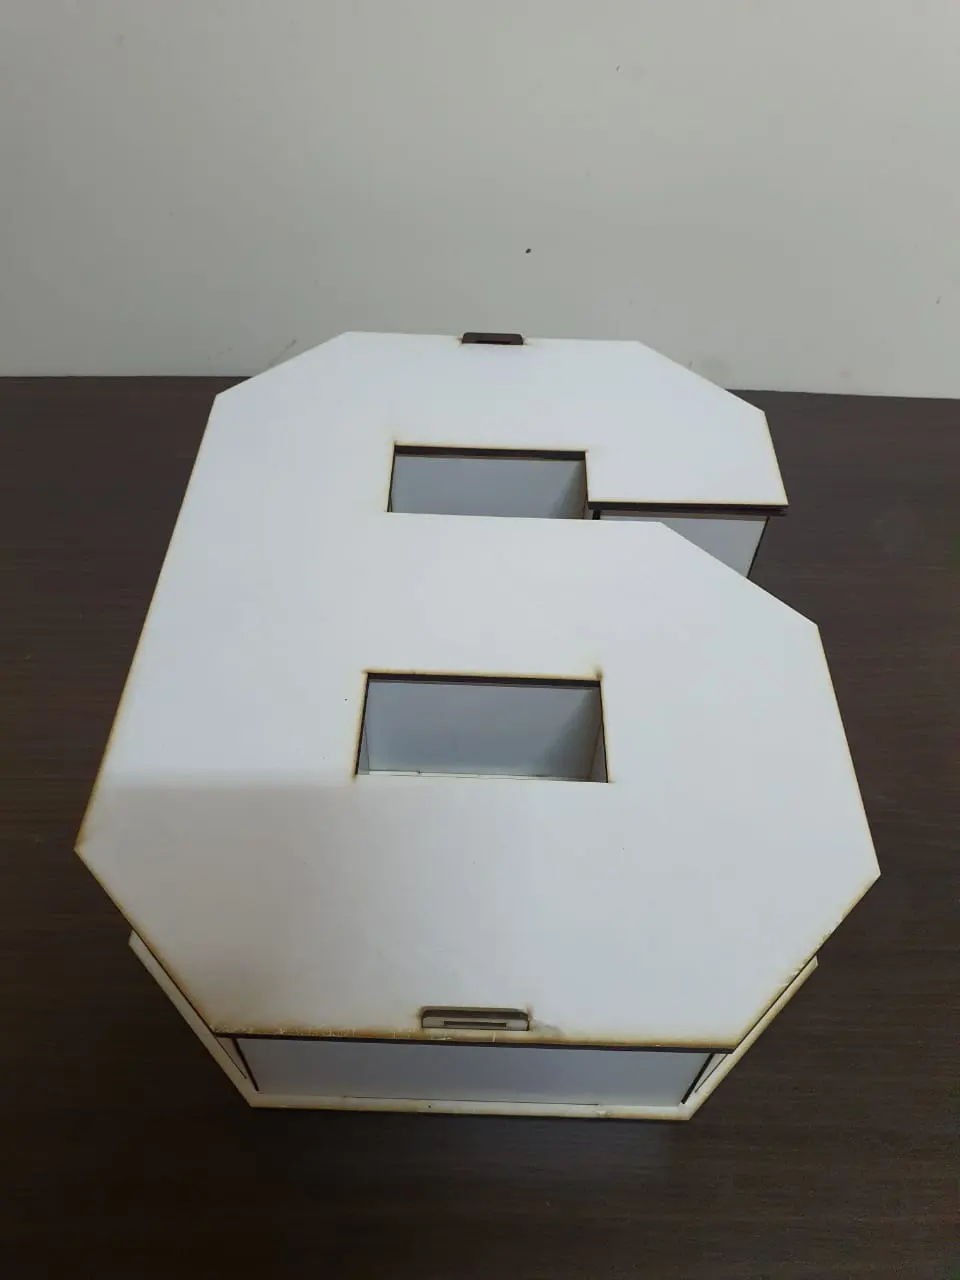 numbers boxes laser design on etsy store 